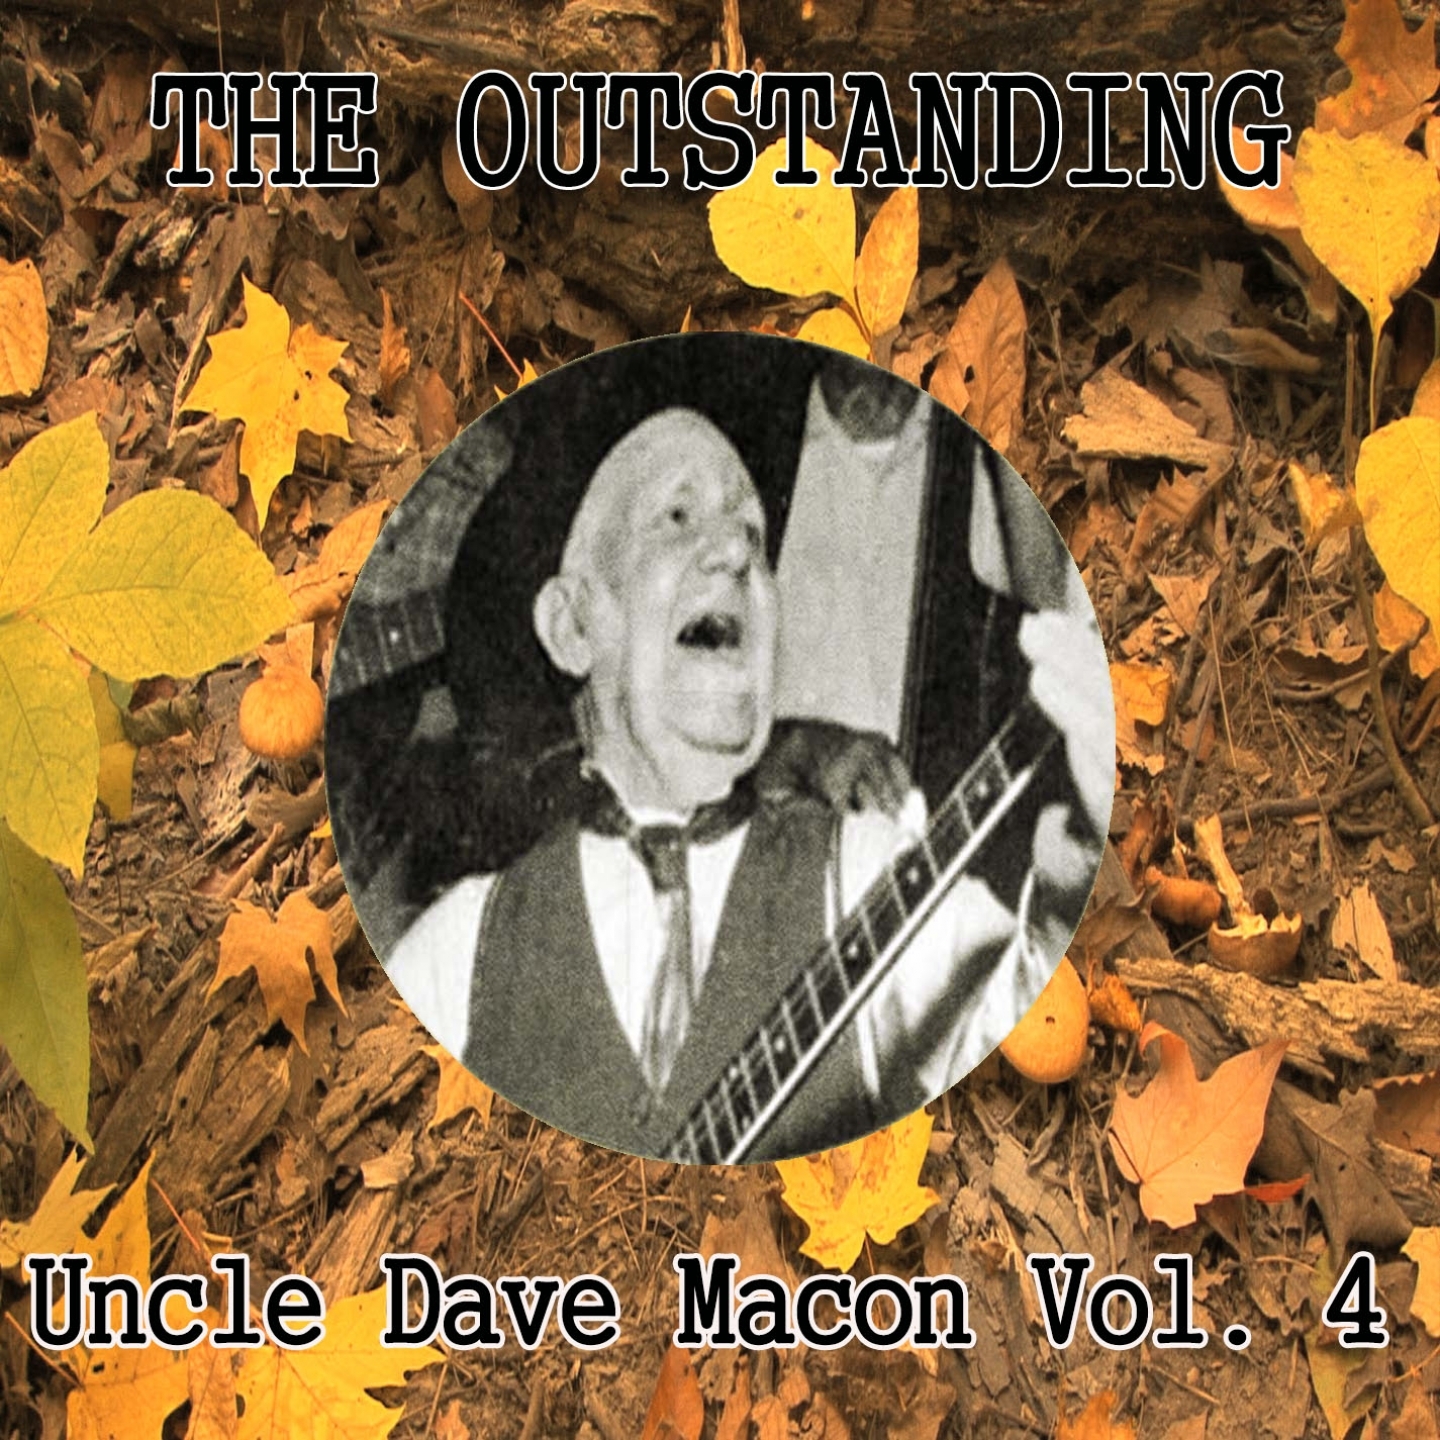 The Outstanding Uncle Dave Macon Vol. 4